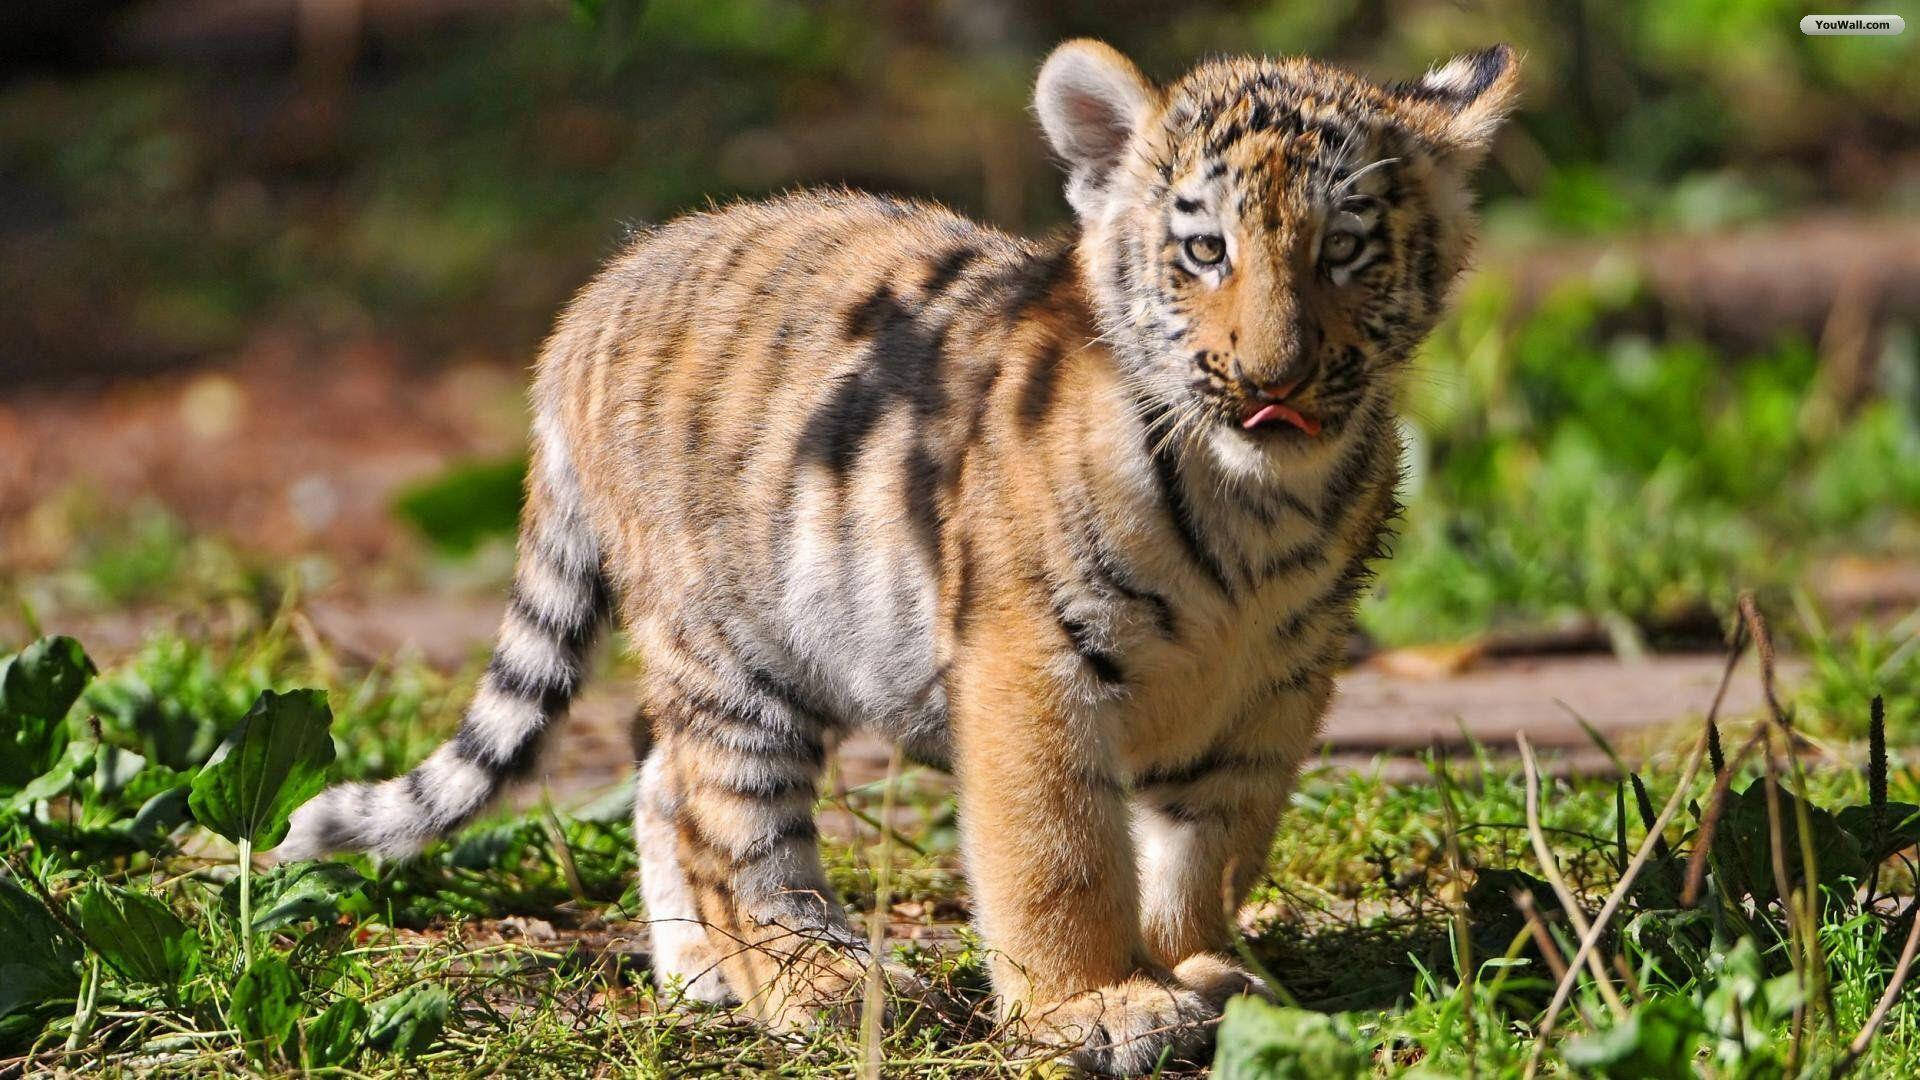 Baby Tiger In Forest Background